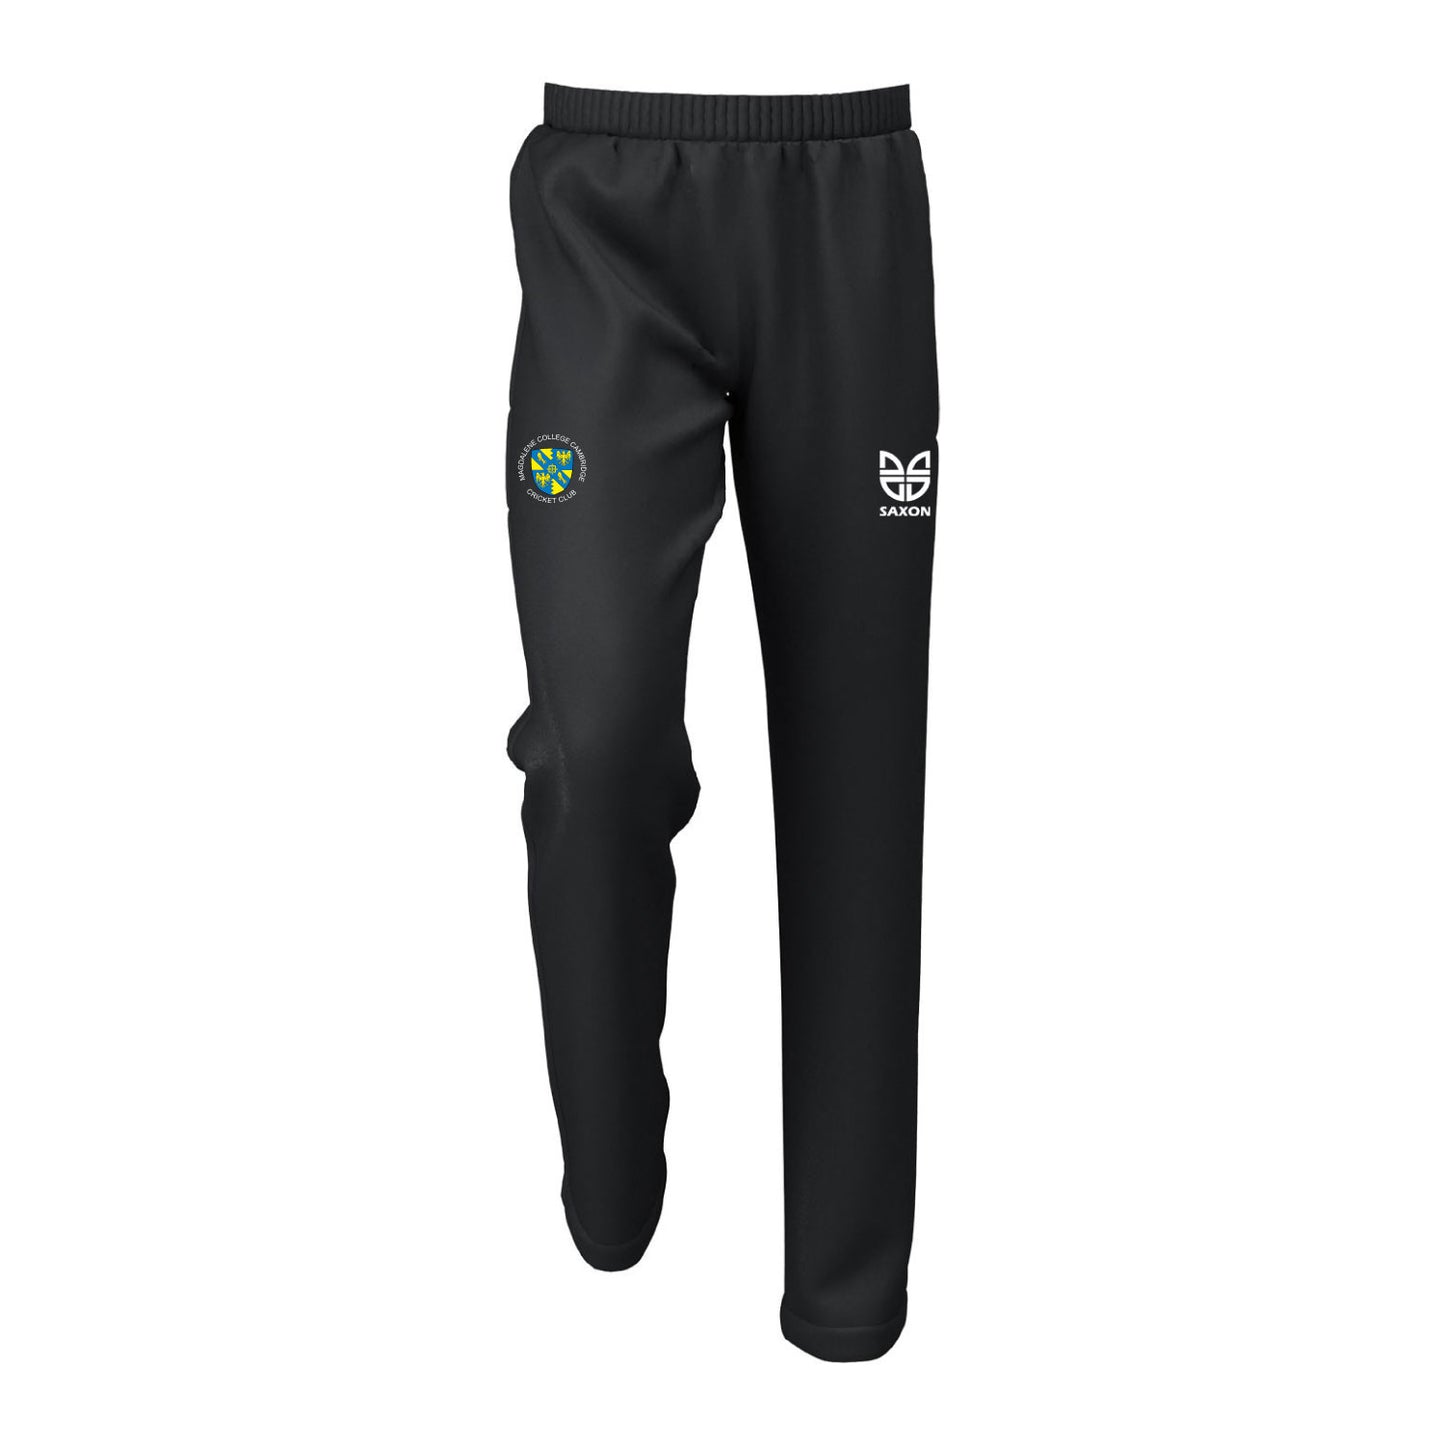 Magdalene College Cambridge Cricket Club Standard Tracksuit Trousers